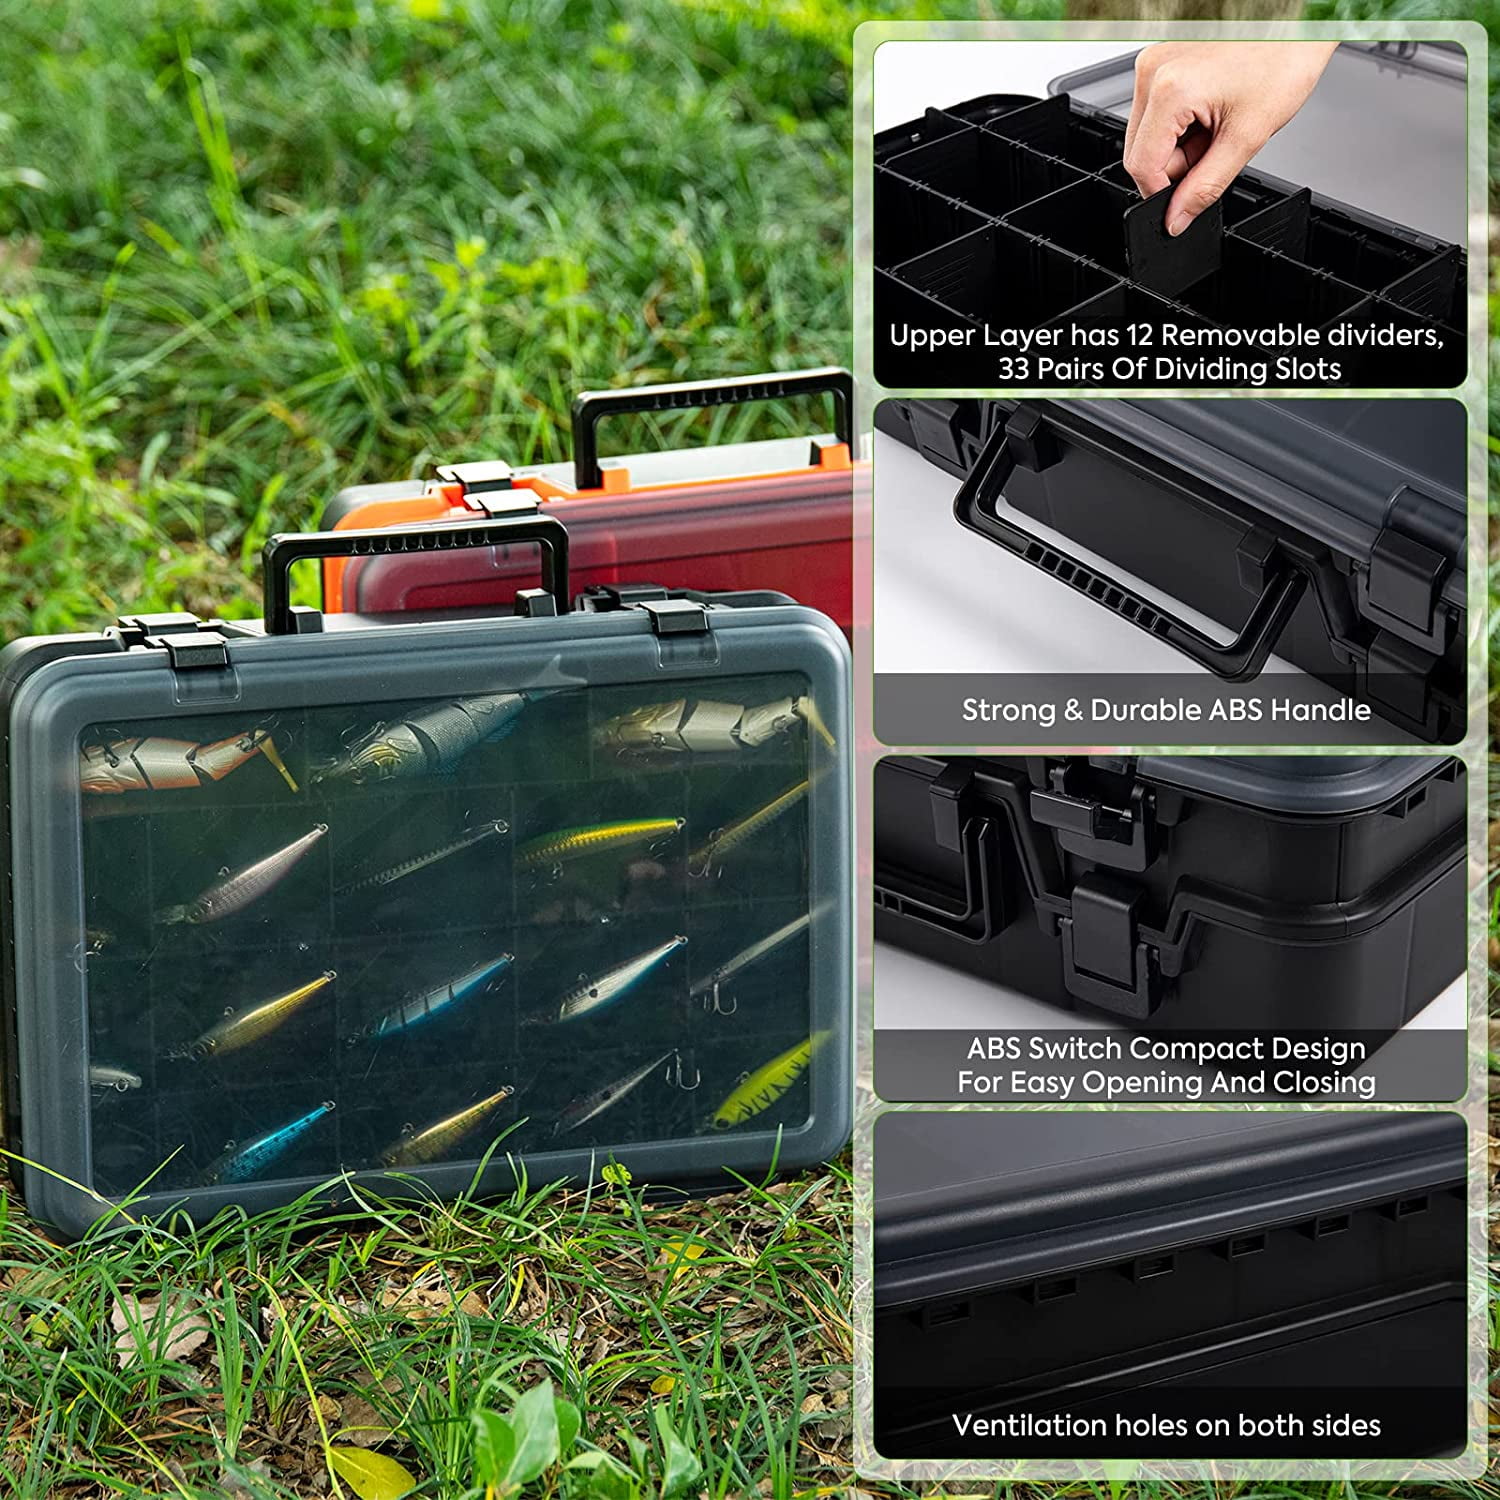  Sjqecyfv Large Tackle Box Double Layer Tackle Box Organizer  Storage with Handle Camping Storage Containers Tool Box : Sports & Outdoors